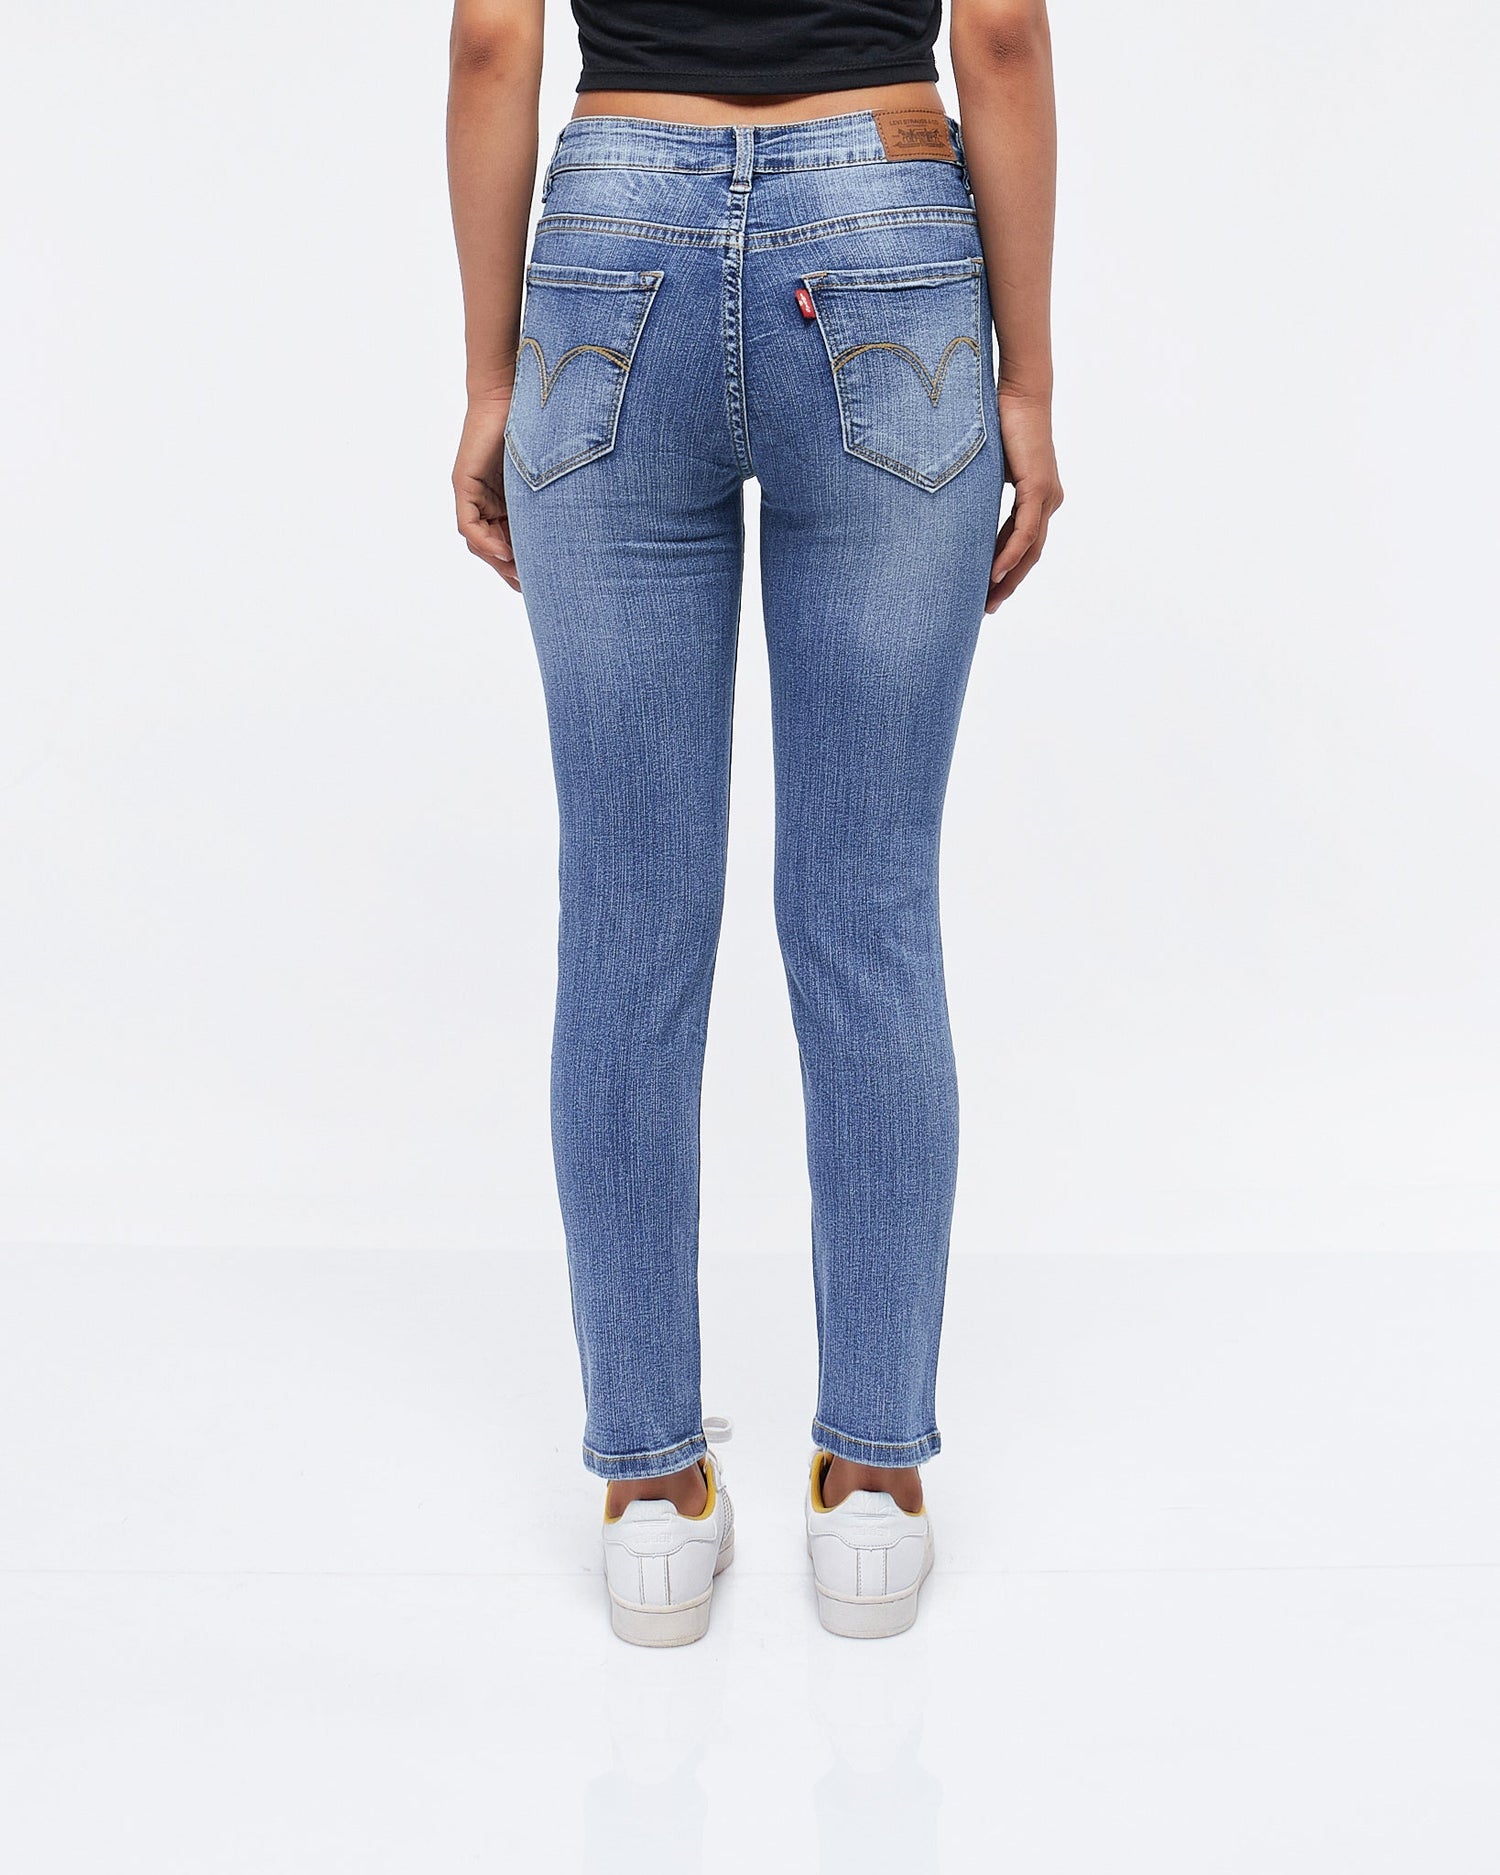 MOI OUTFIT-Distress Slim Fit 711 Lady Jeans 19.90